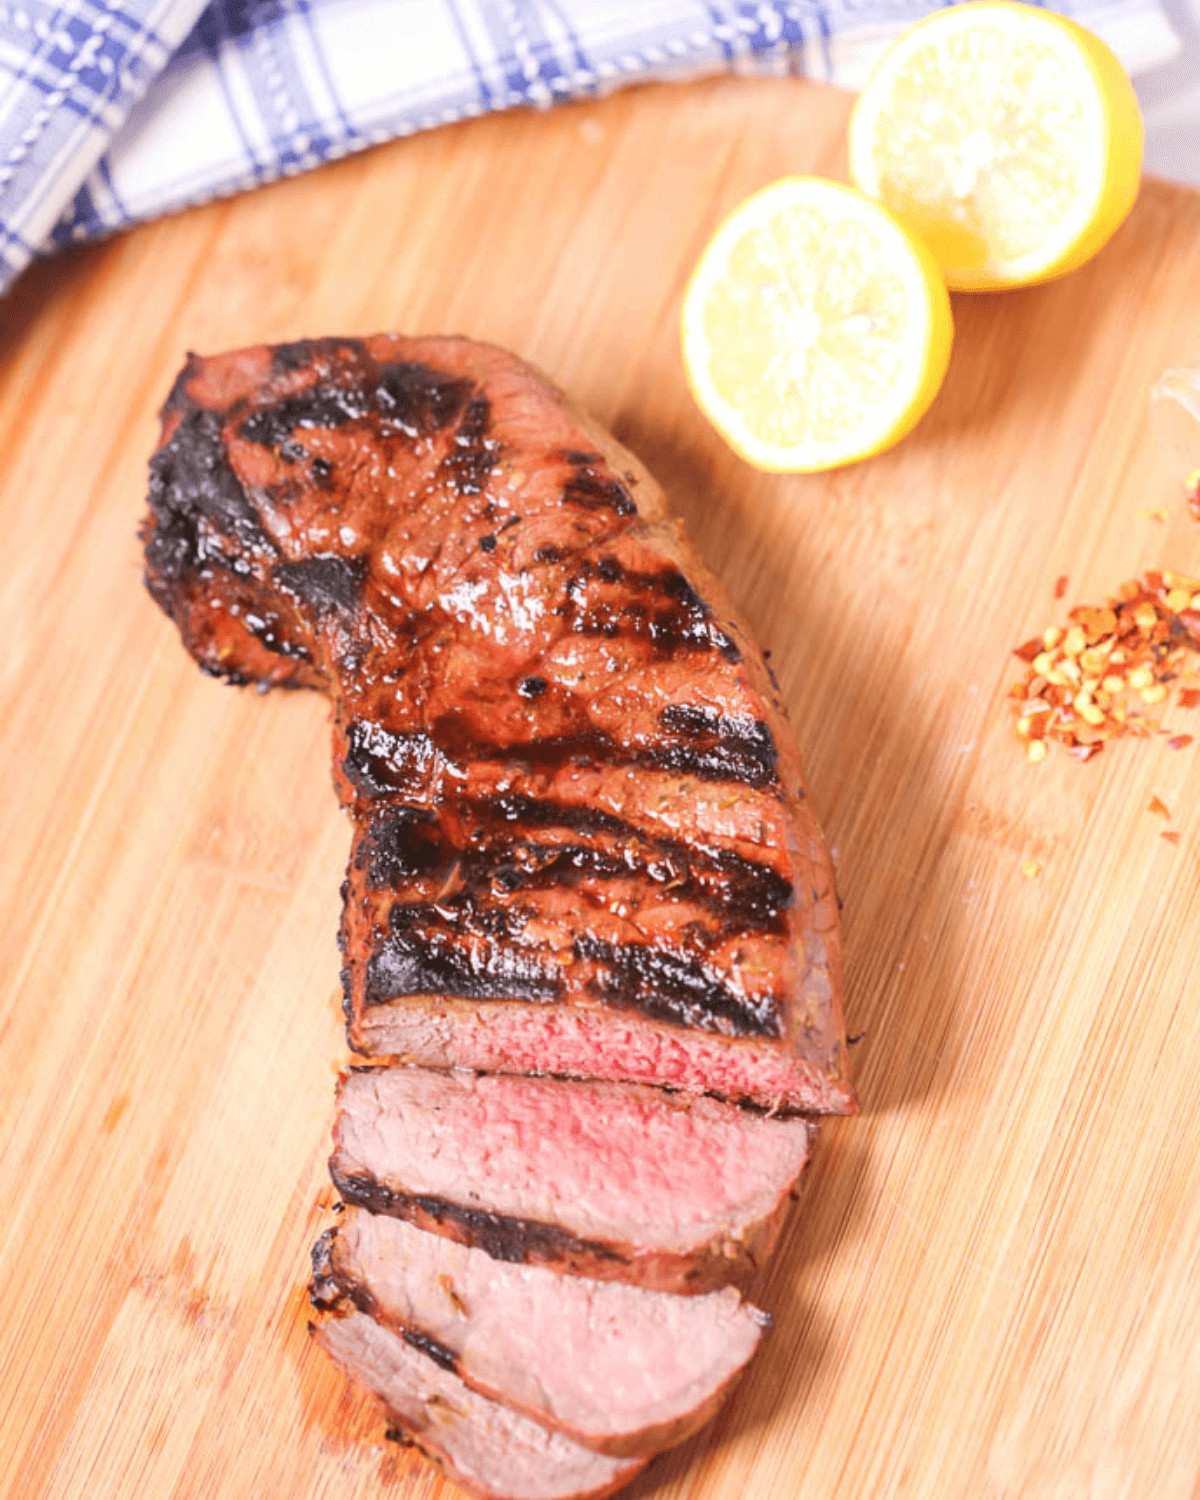 Grilled London broil sliced and served on a wooden board with lemon halves and spices.